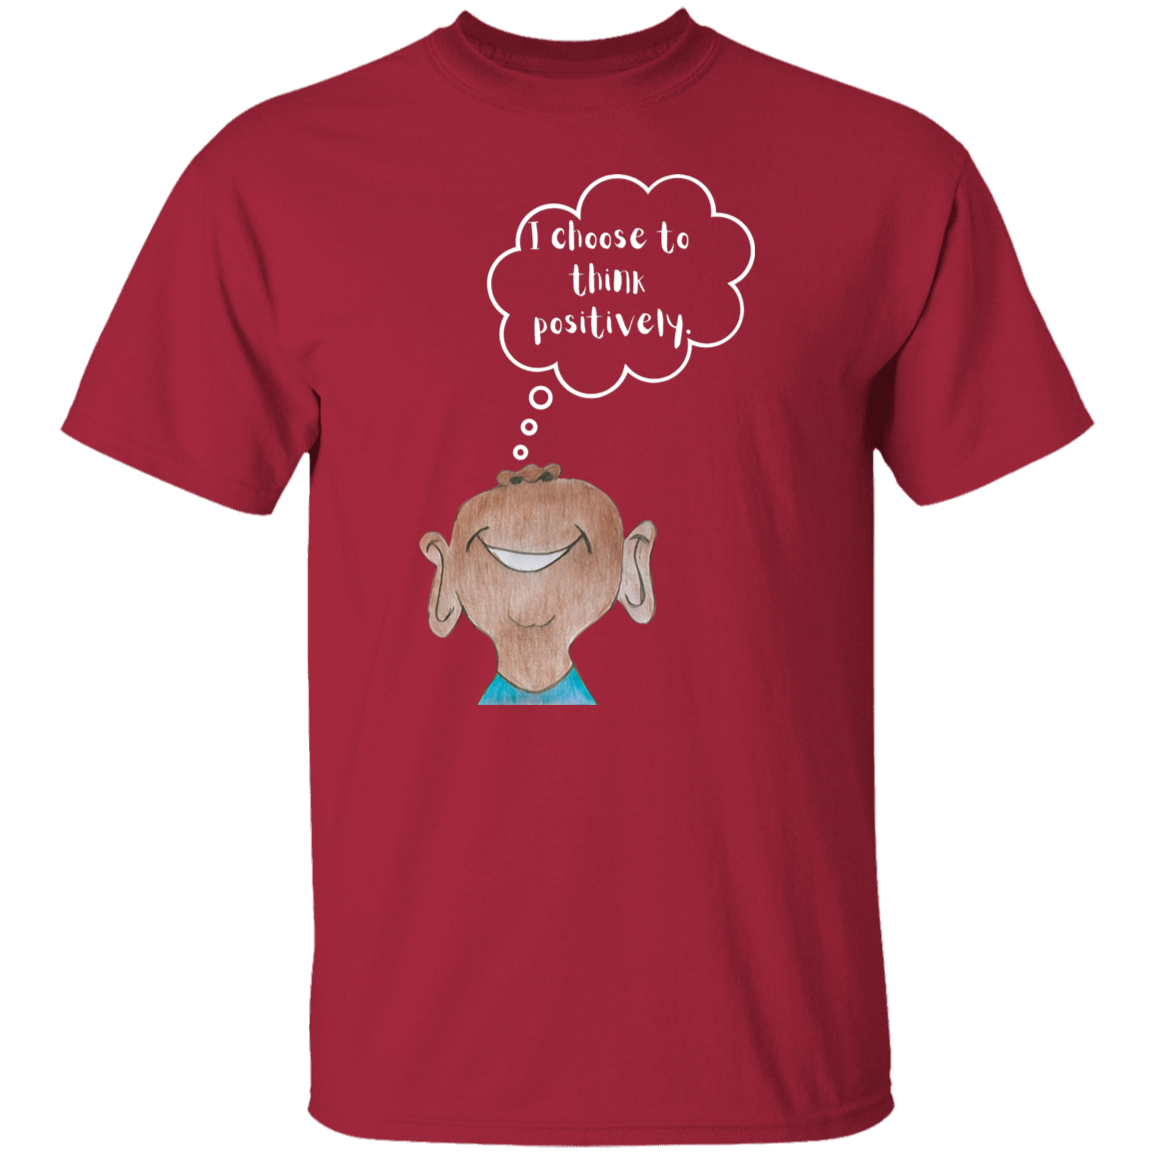 I choose to think positively. Youth 5.3 oz 100% Cotton T-Shirt